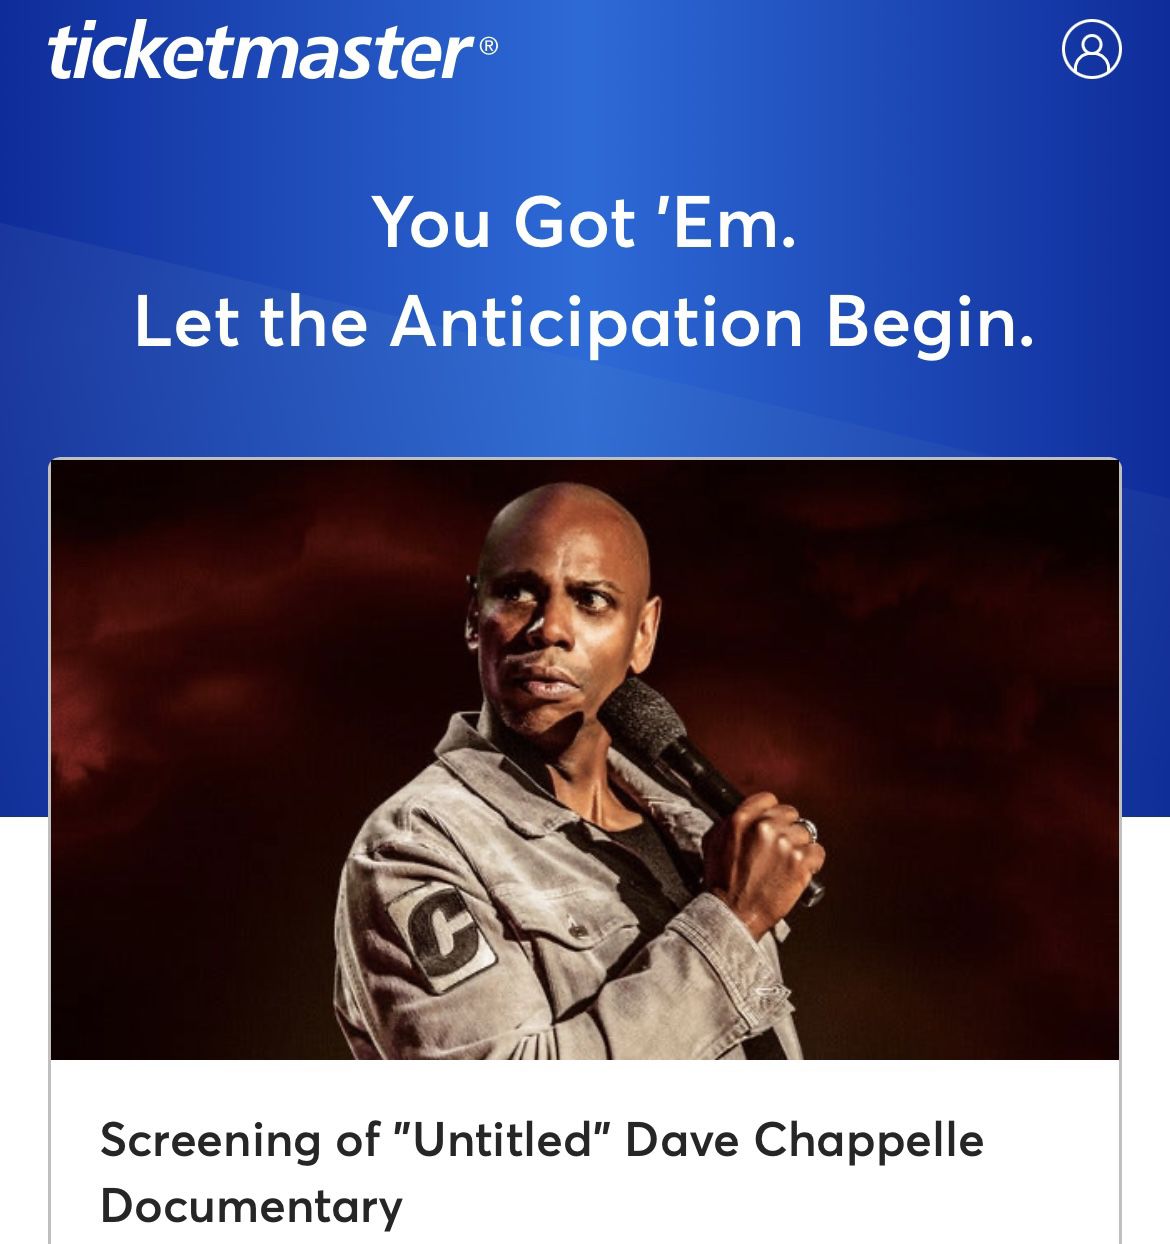 Dave chapelle screening of “untitled” (2 tickets)